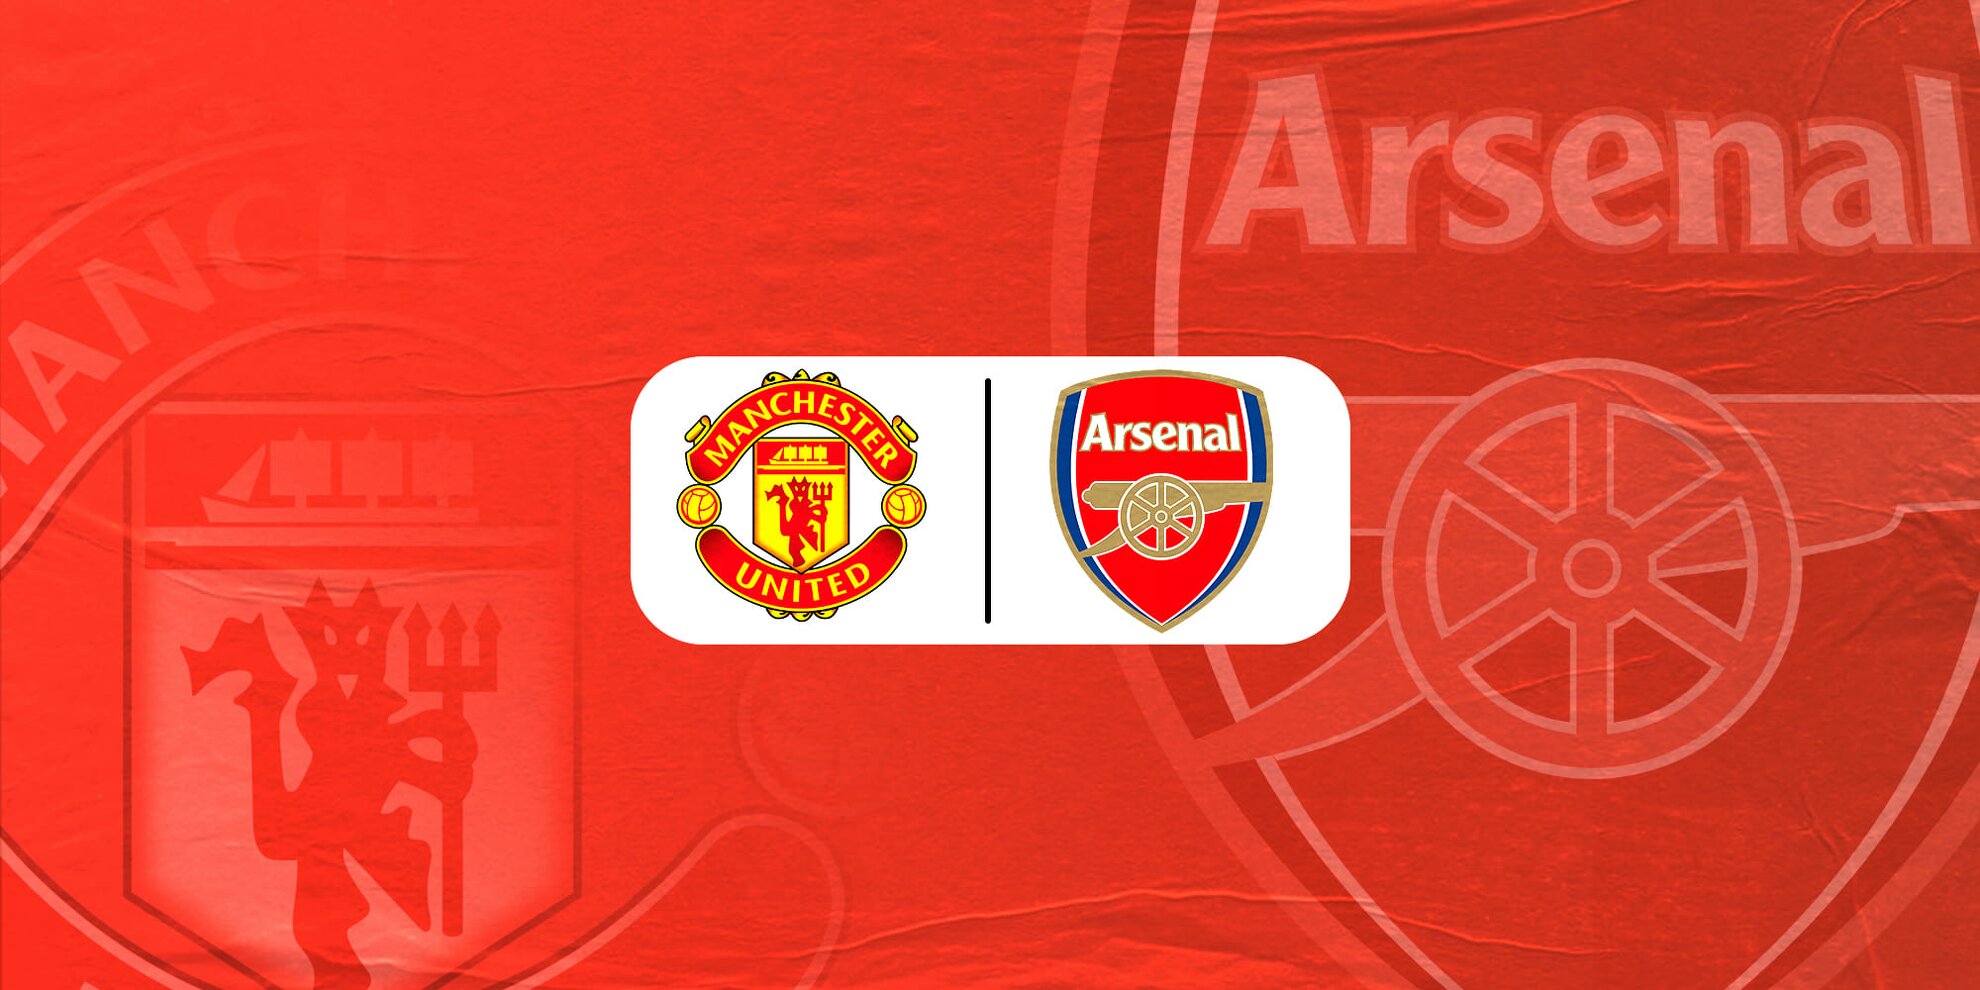 Manchester United vs Arsenal: Match Preview - 4 Sep, 2022